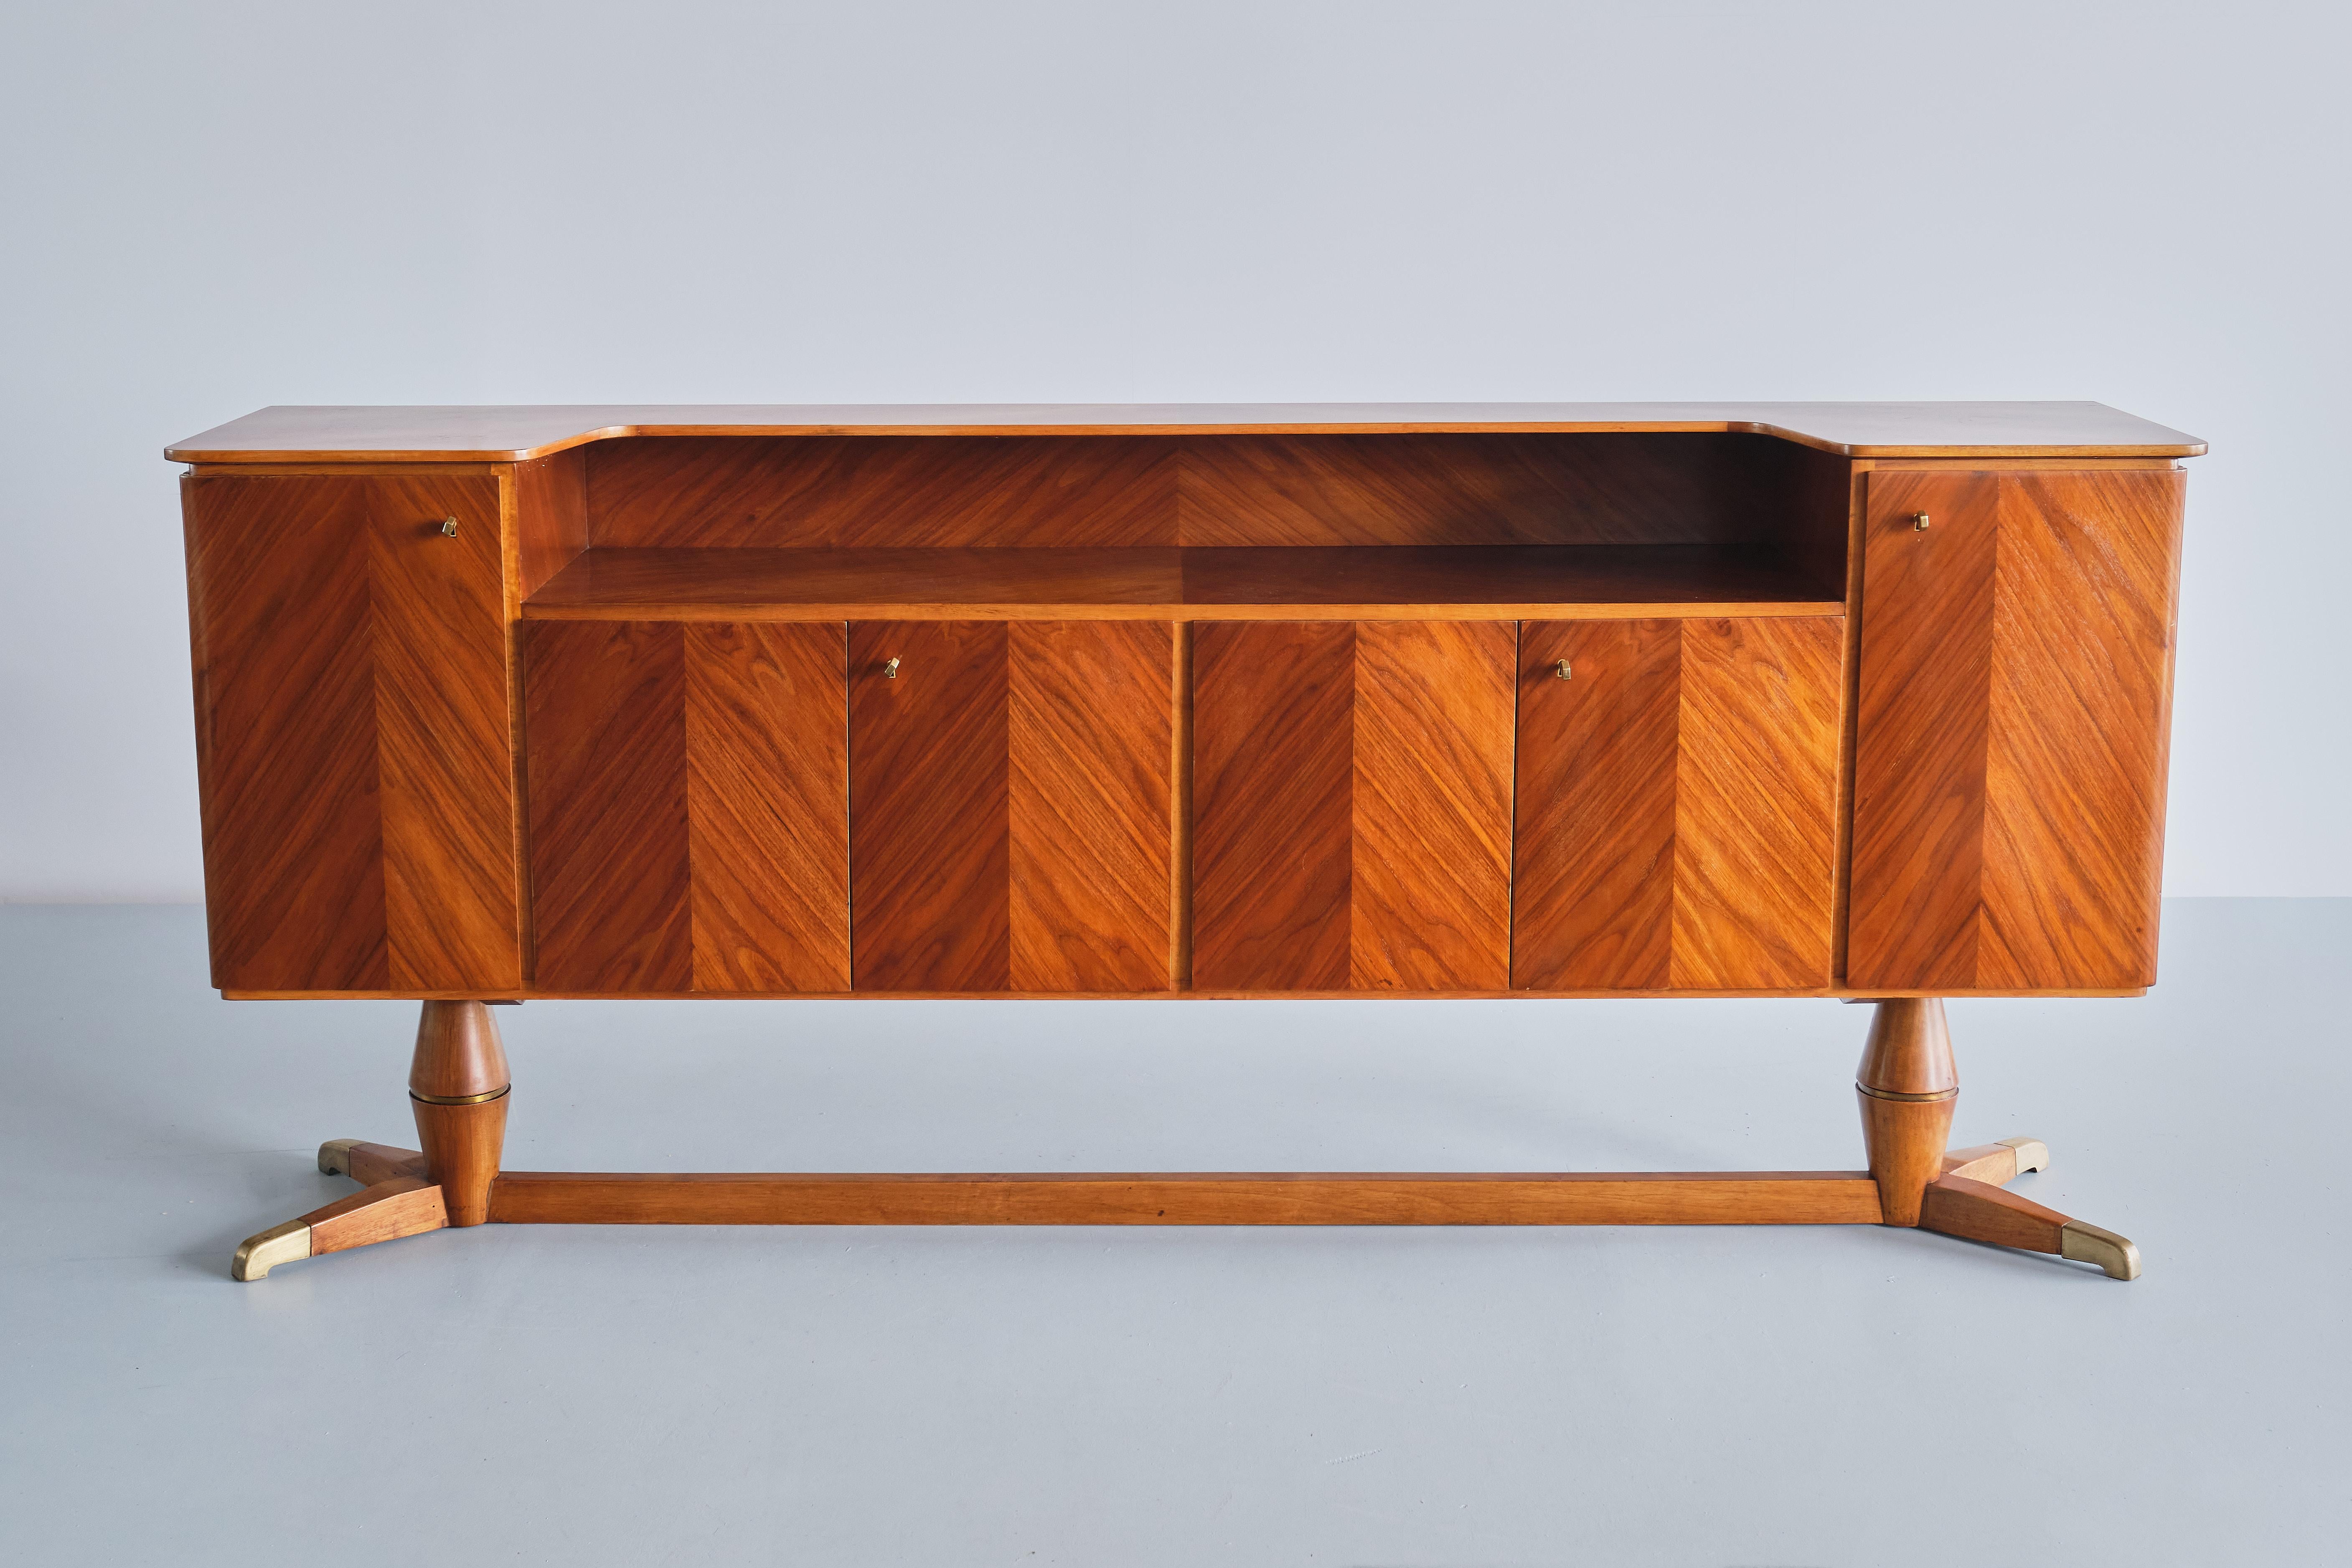 This exceptional sideboard was produced by the company Serafino Arrighi in Cantù, Italy in the late 1940s. The design is attributed to Paolo Buffa, who worked with Serafino Arrighi for the execution of many of his designs in this era. 
The design